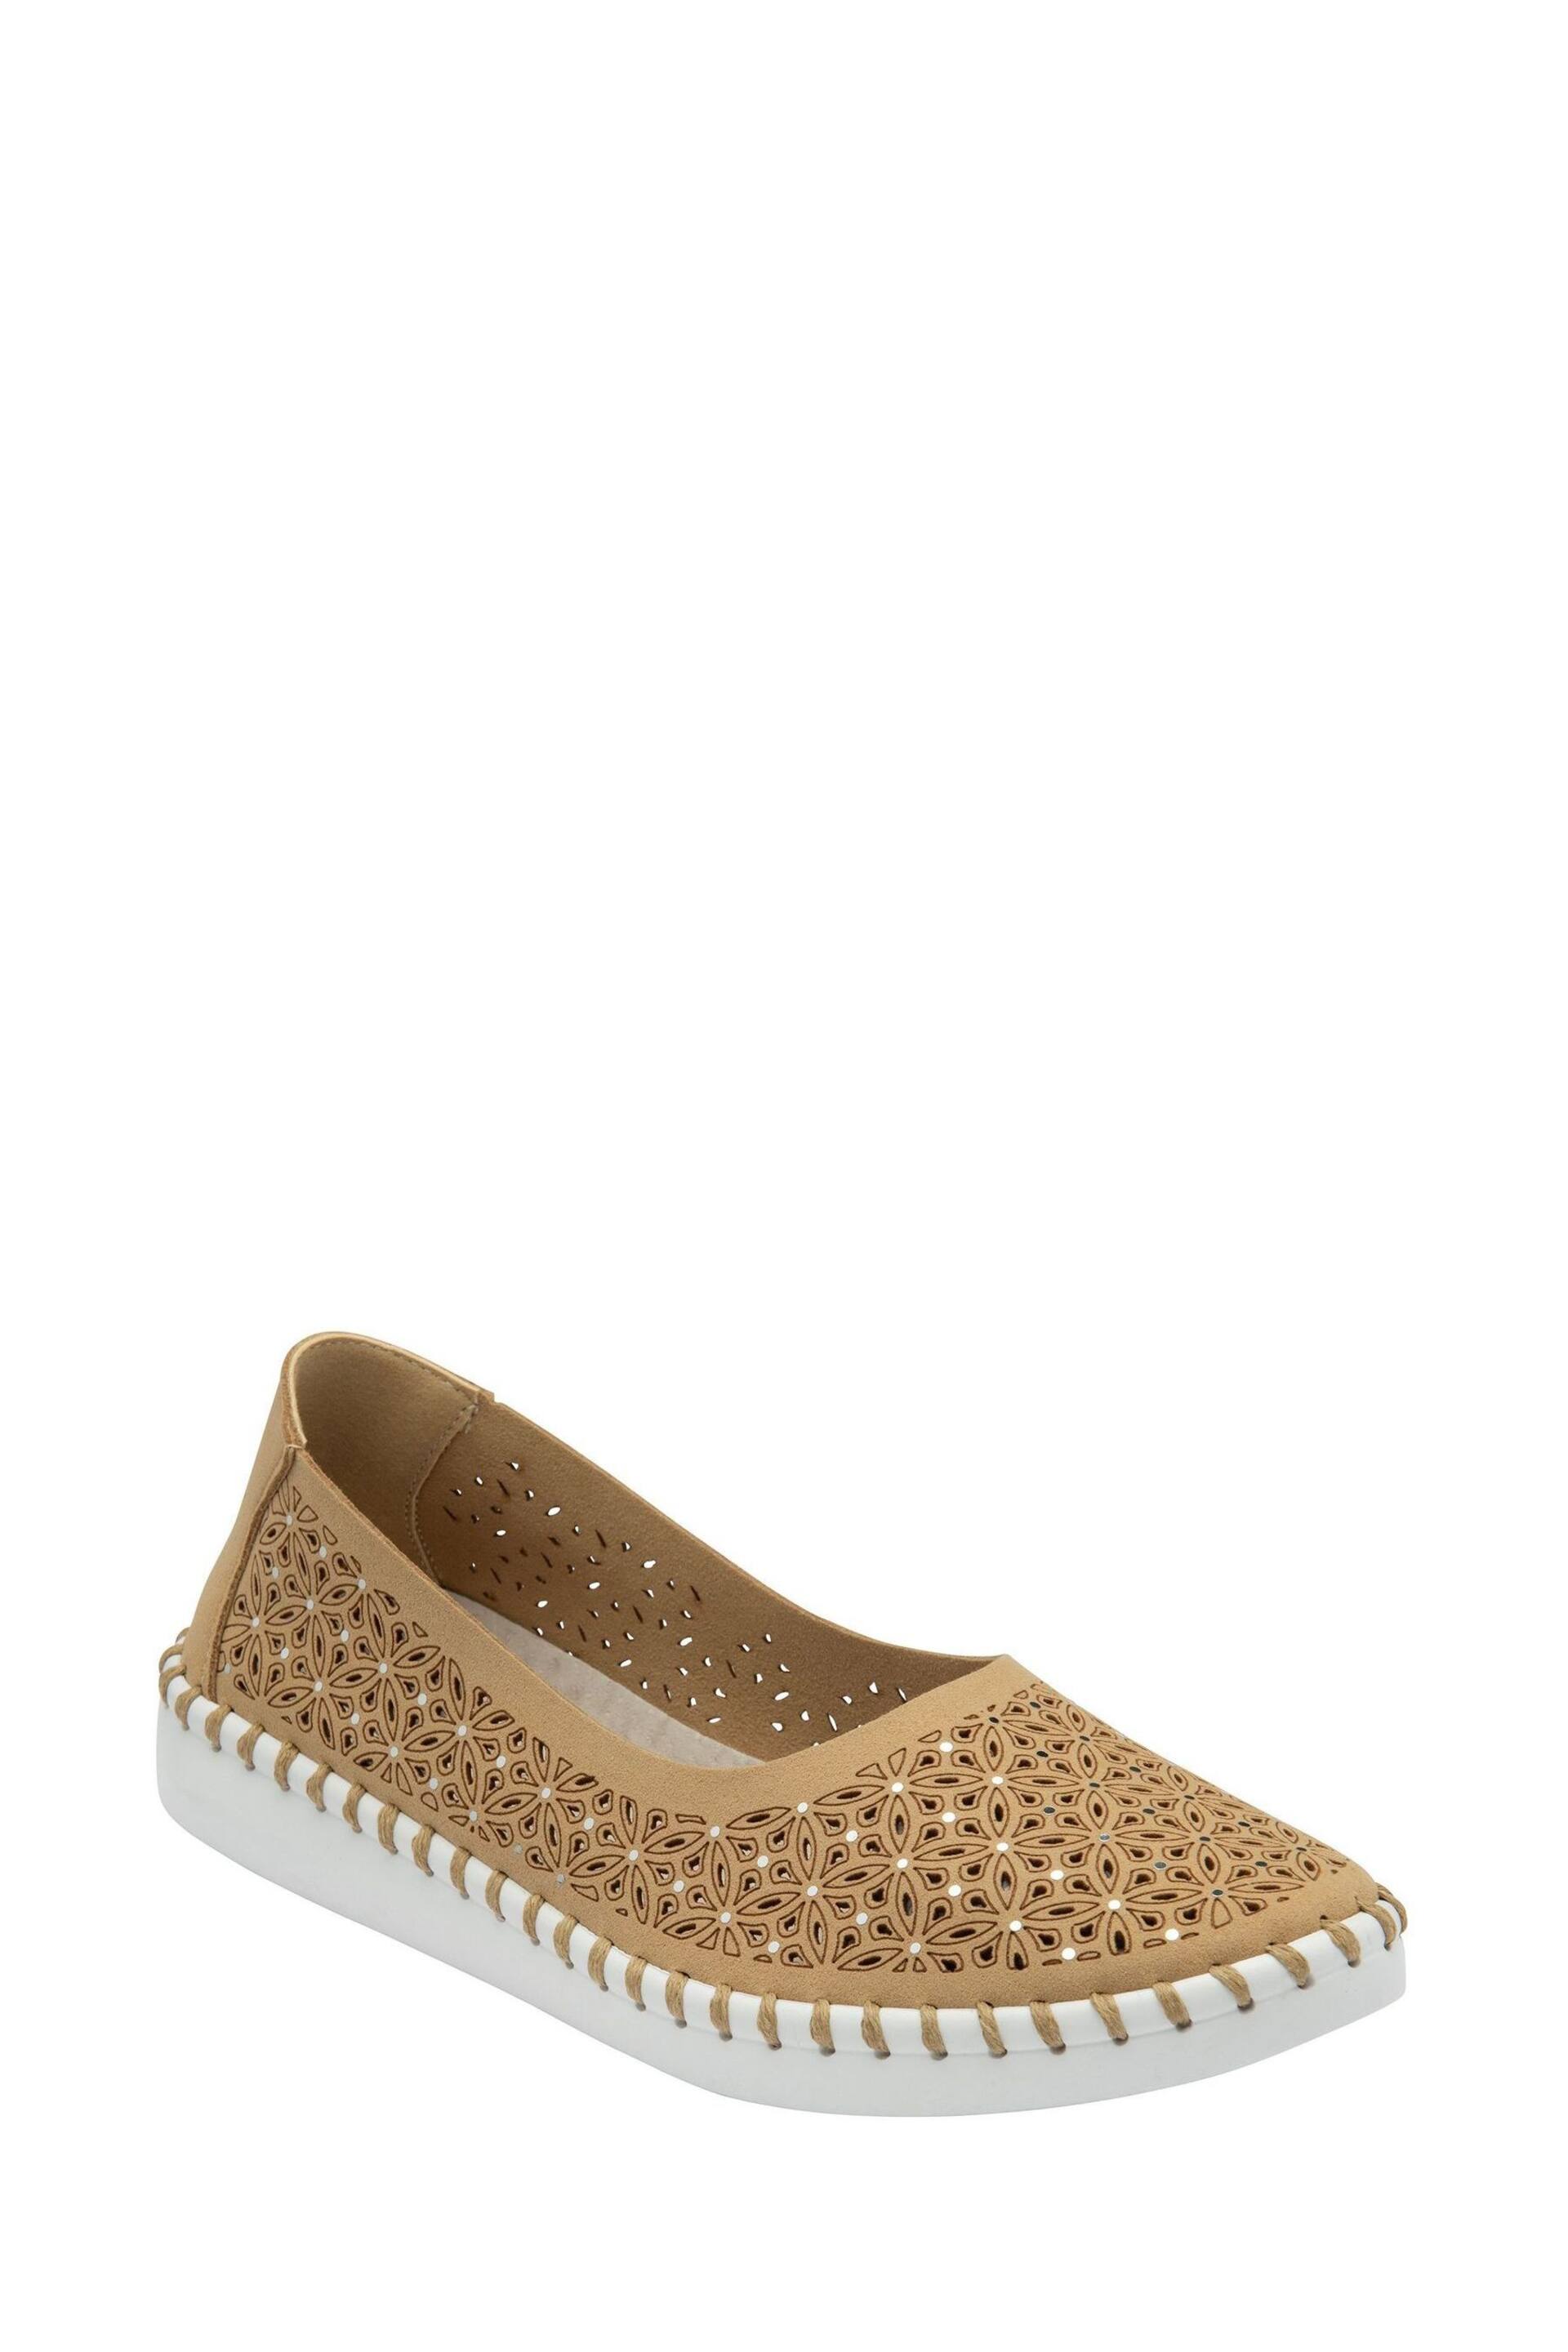 Lotus Natural Slip-On Casual Shoes - Image 1 of 4